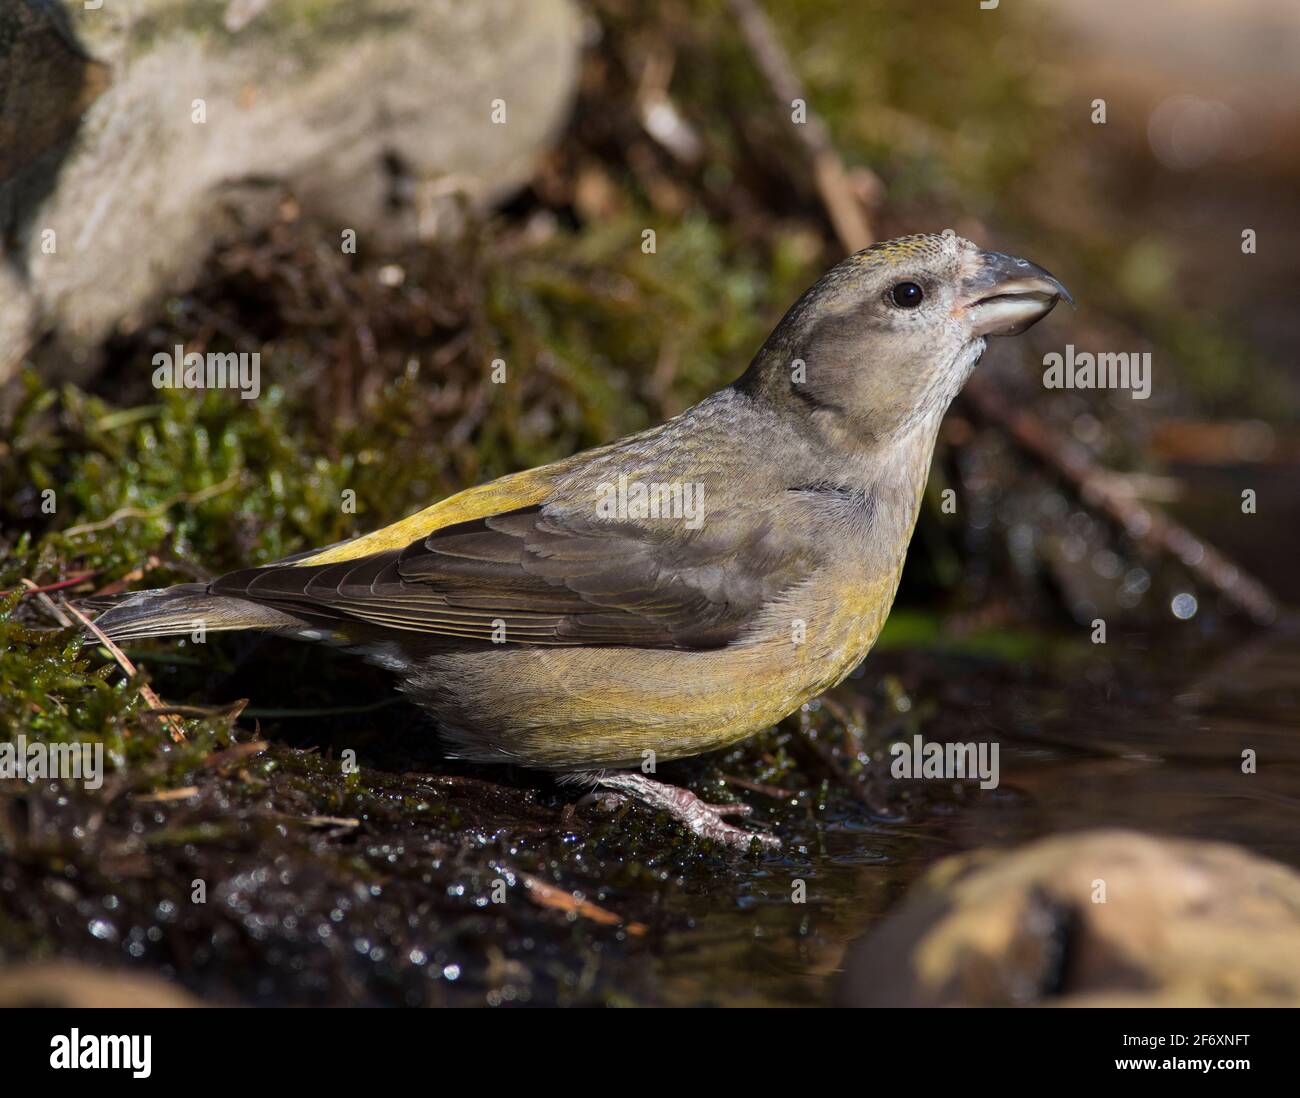 Female Common Crossbill (Loxia curvirostra) at a drinking pool in a ...